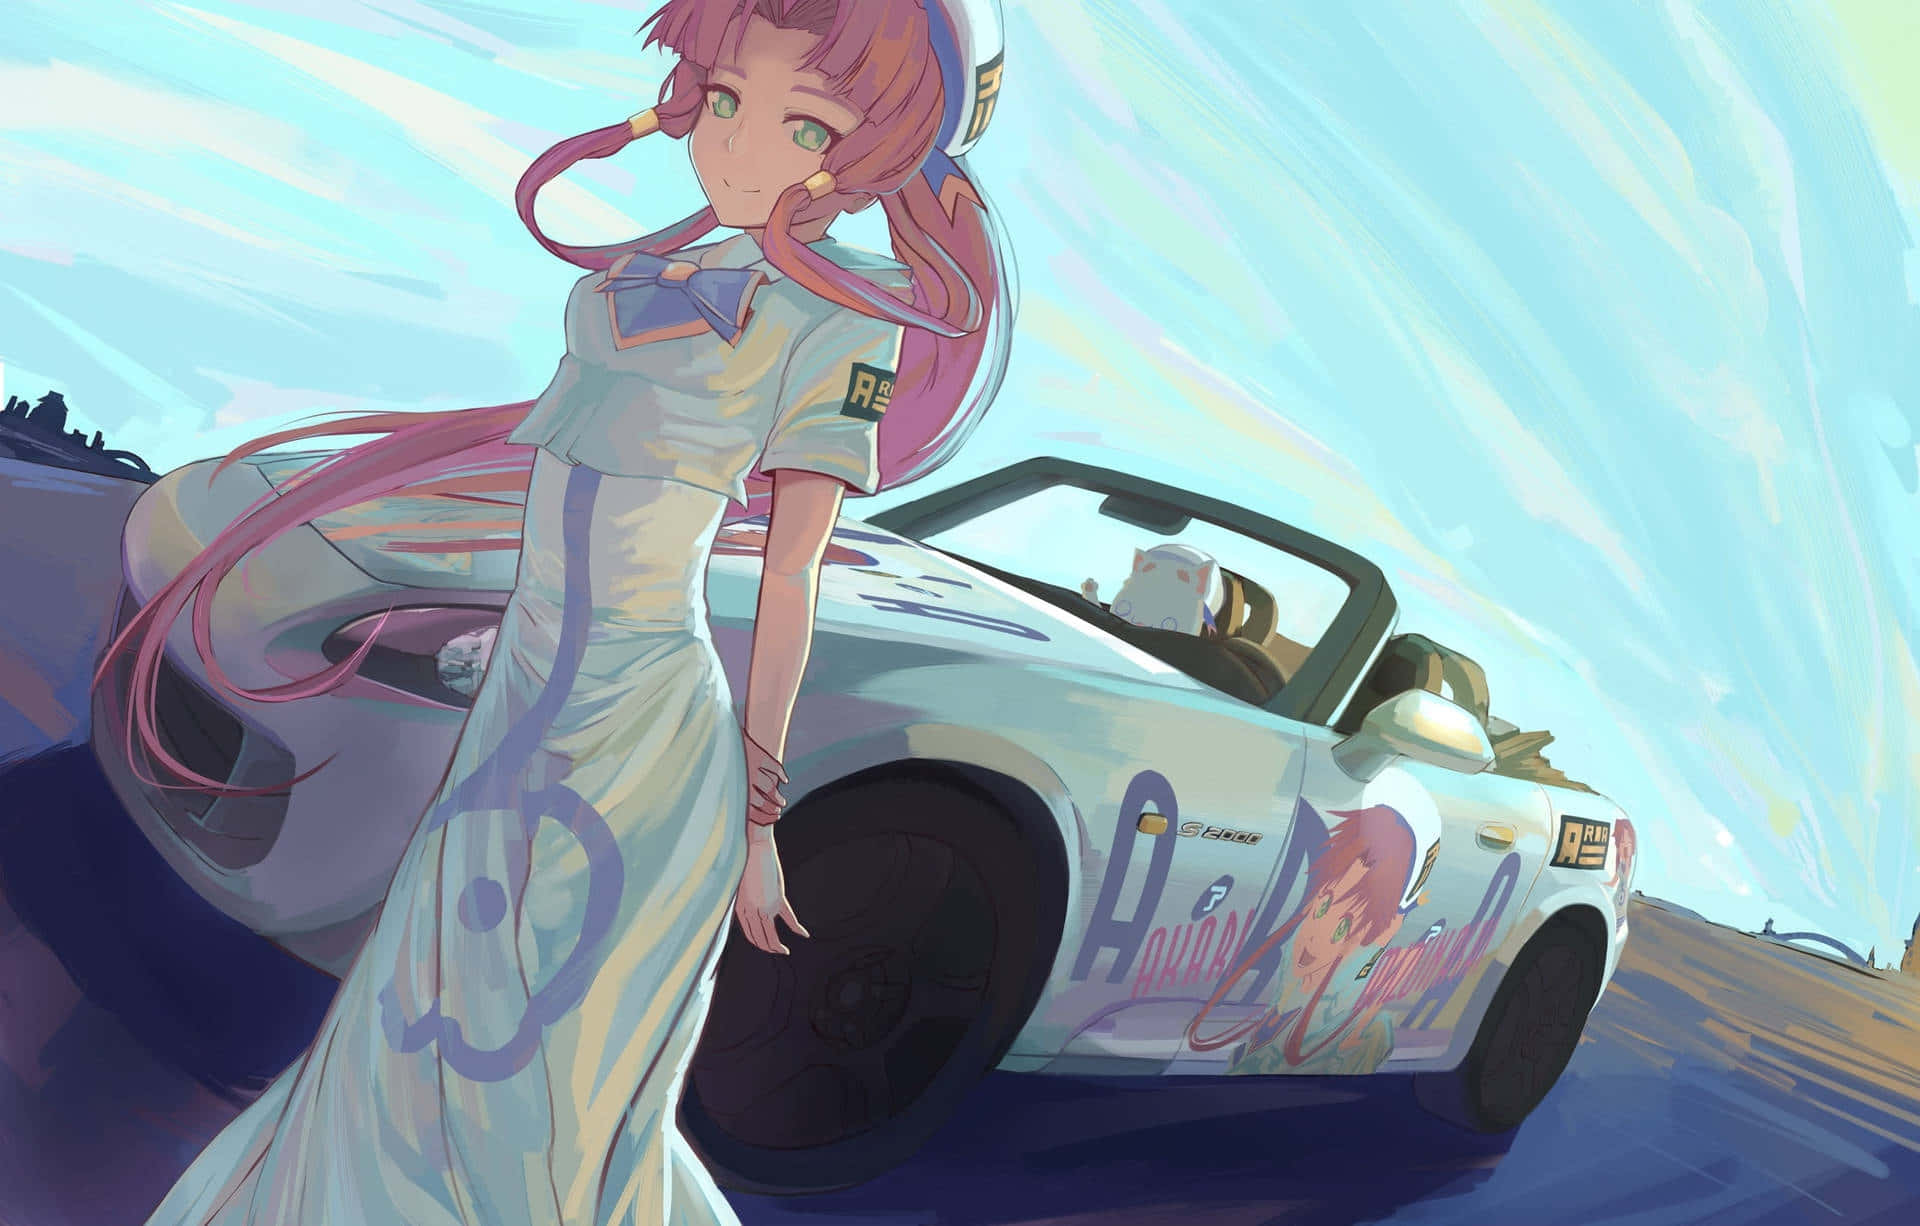 Anime Style Girl With Sports Car Pfp Wallpaper